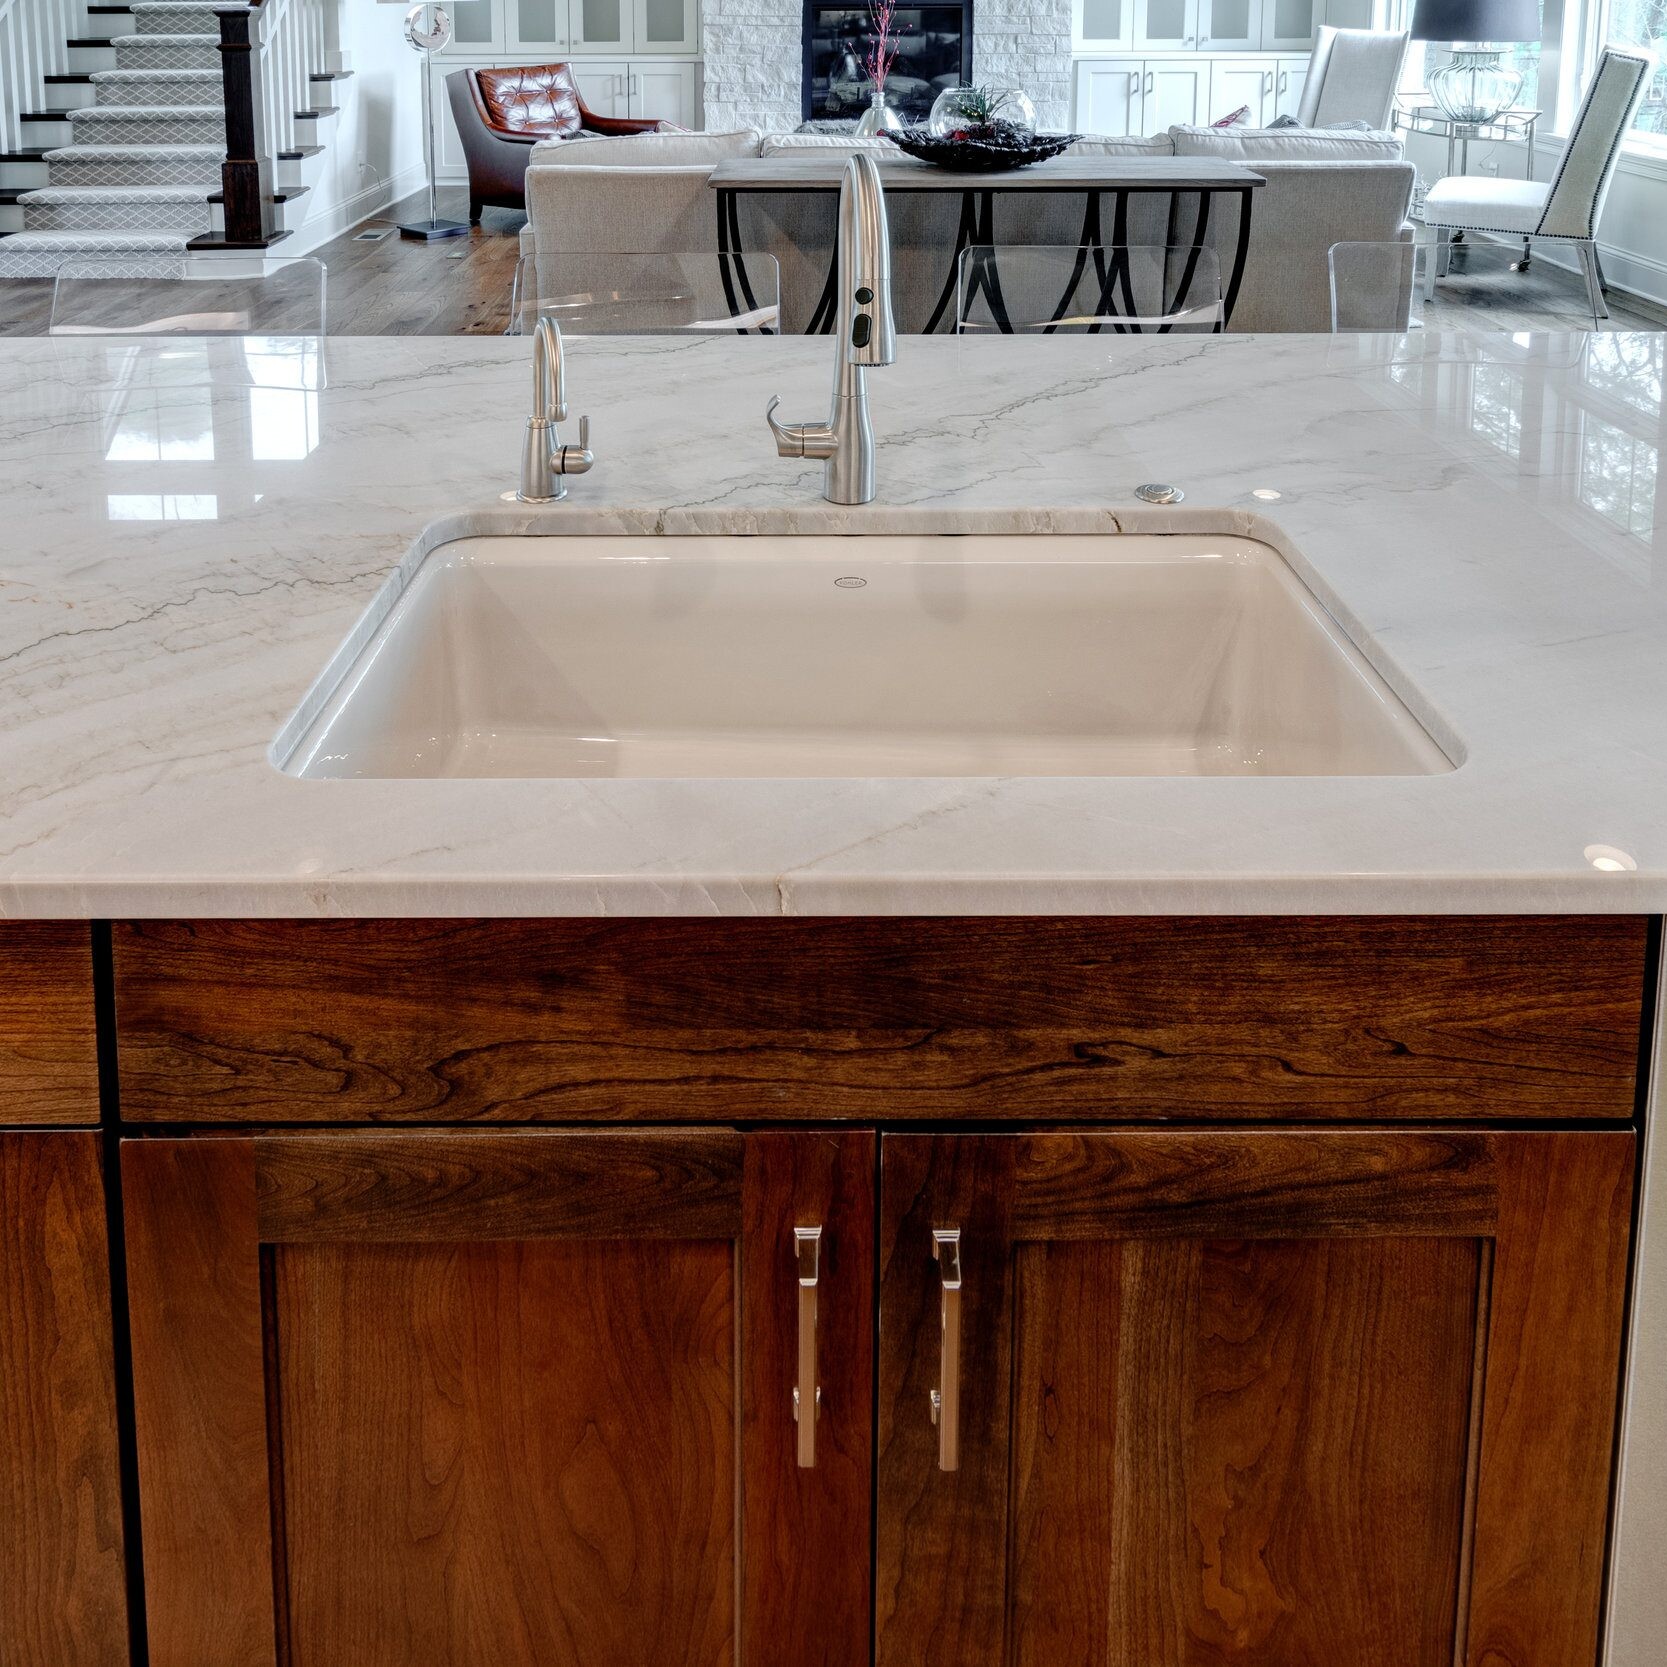 A custom home builder in Carmel, Indiana offers new home construction with a kitchen featuring a luxurious marble counter top.